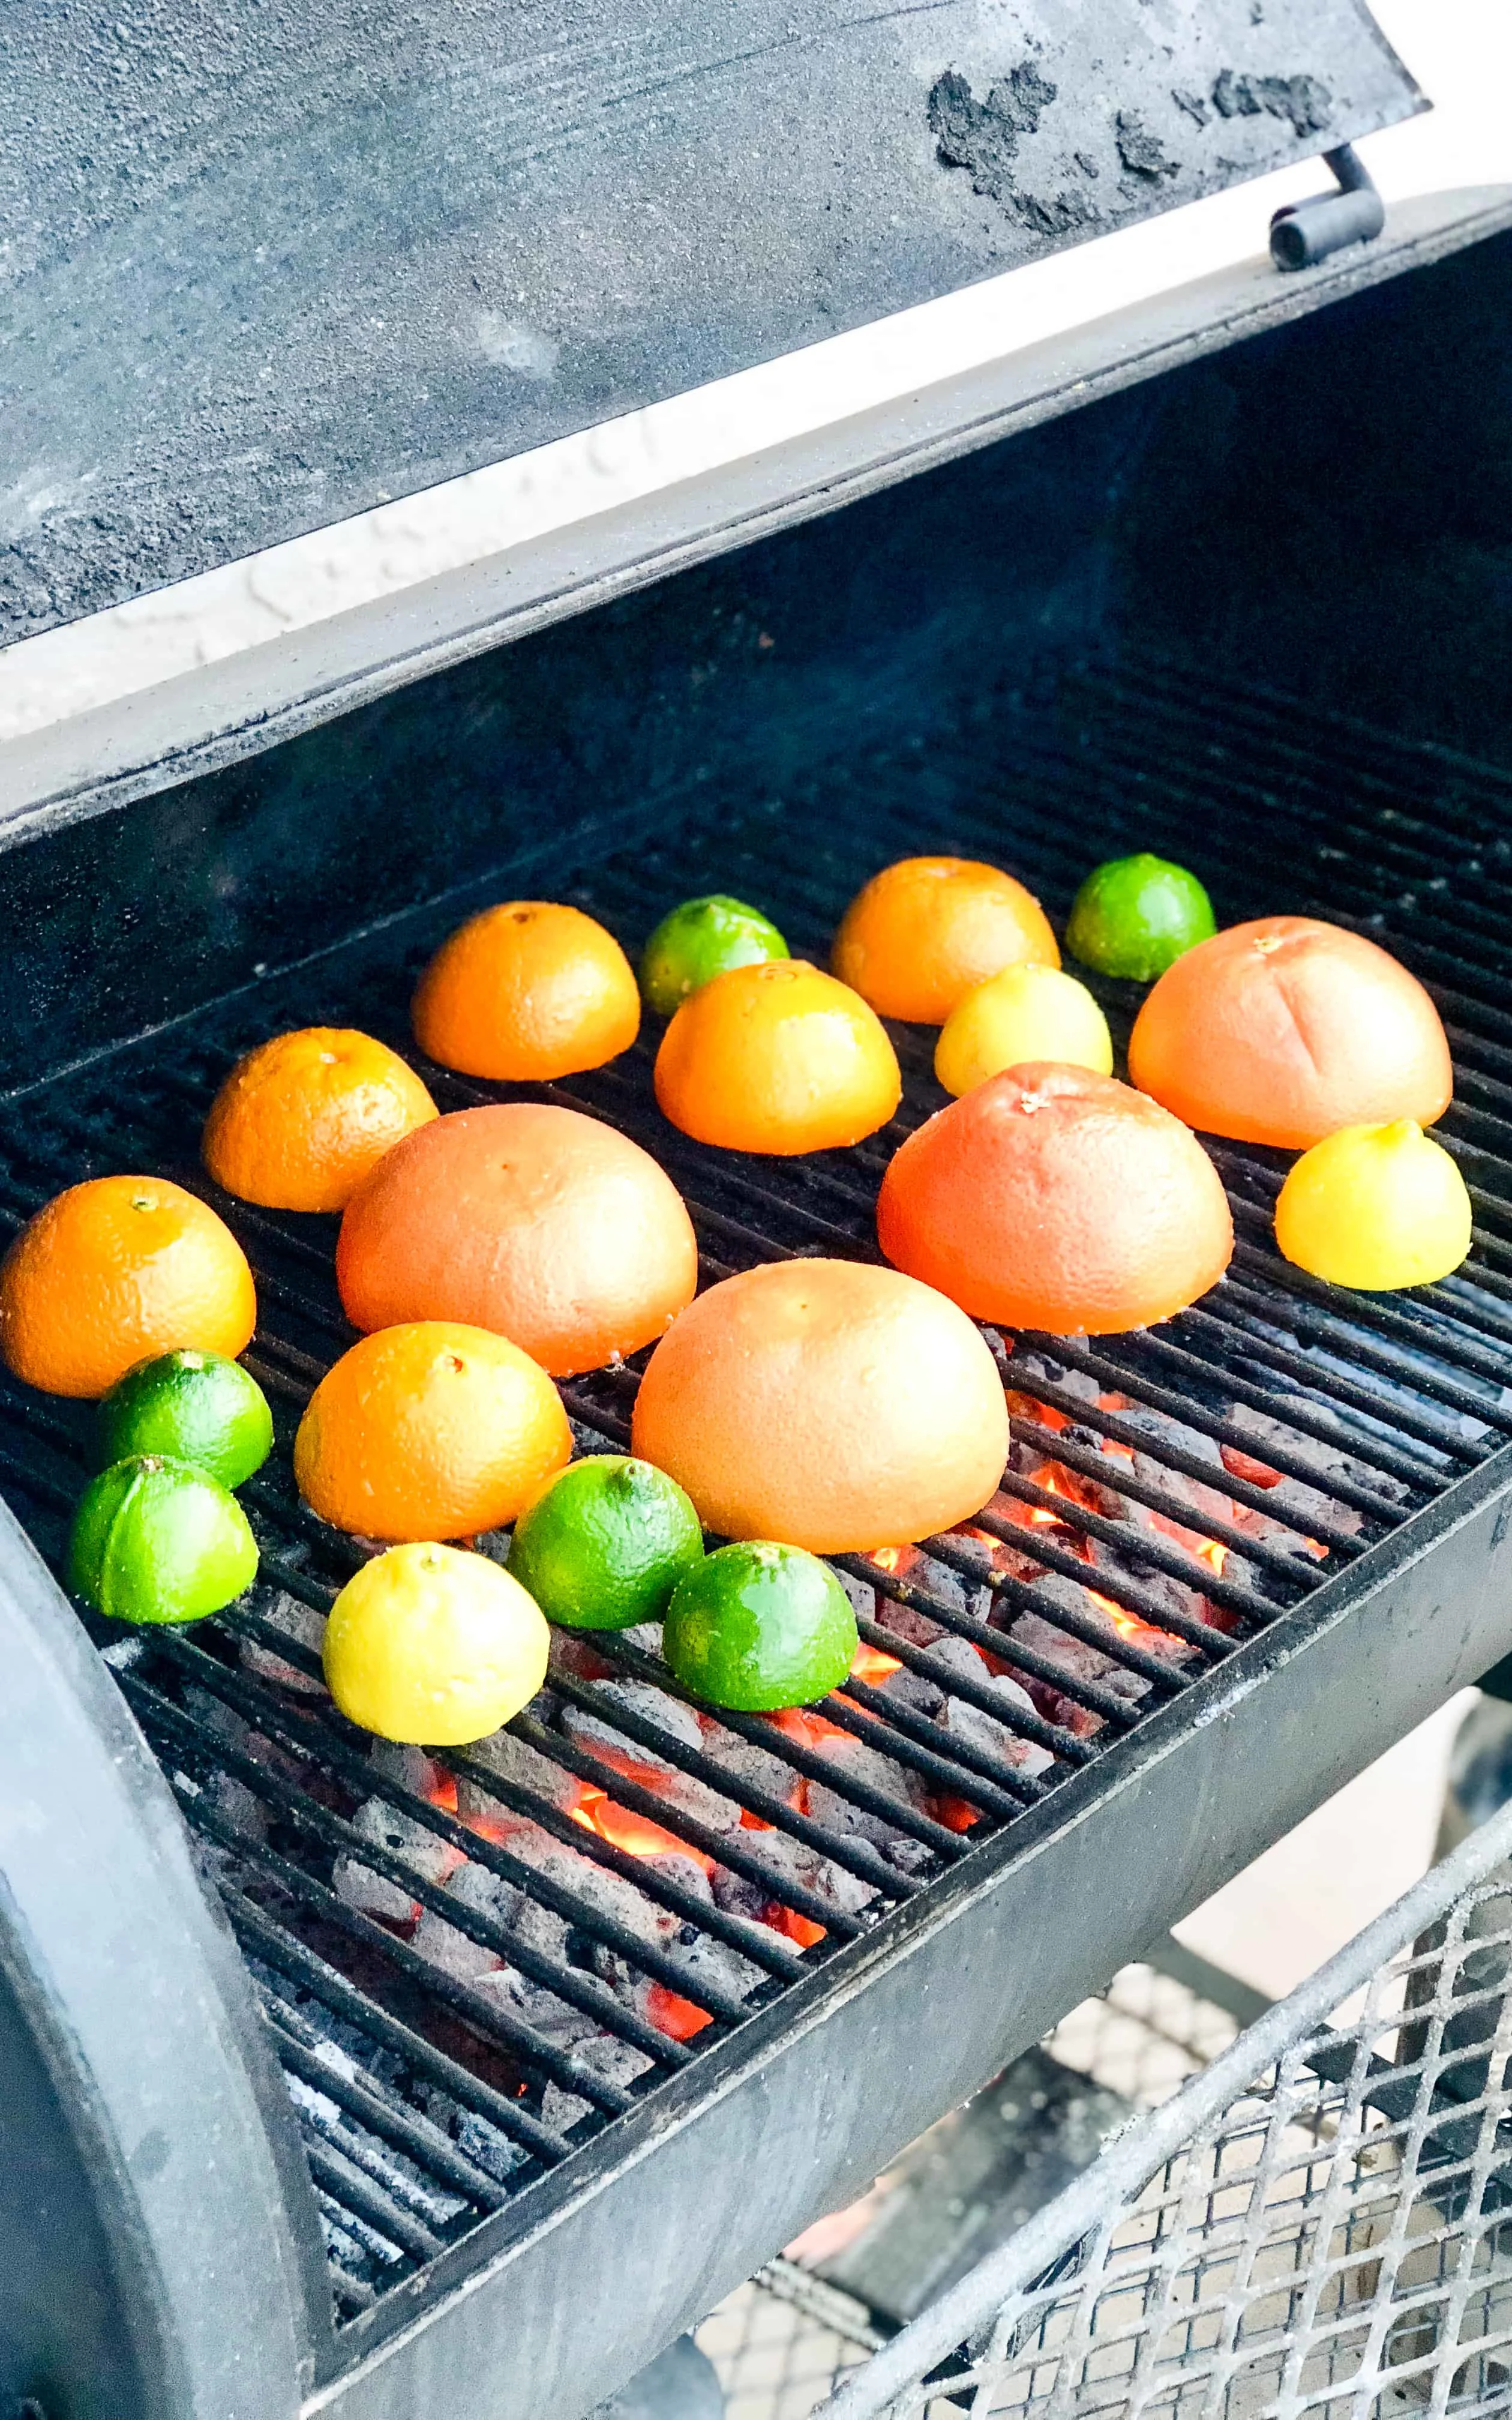 Grill the citrus face down before you cook any meats or veggies.